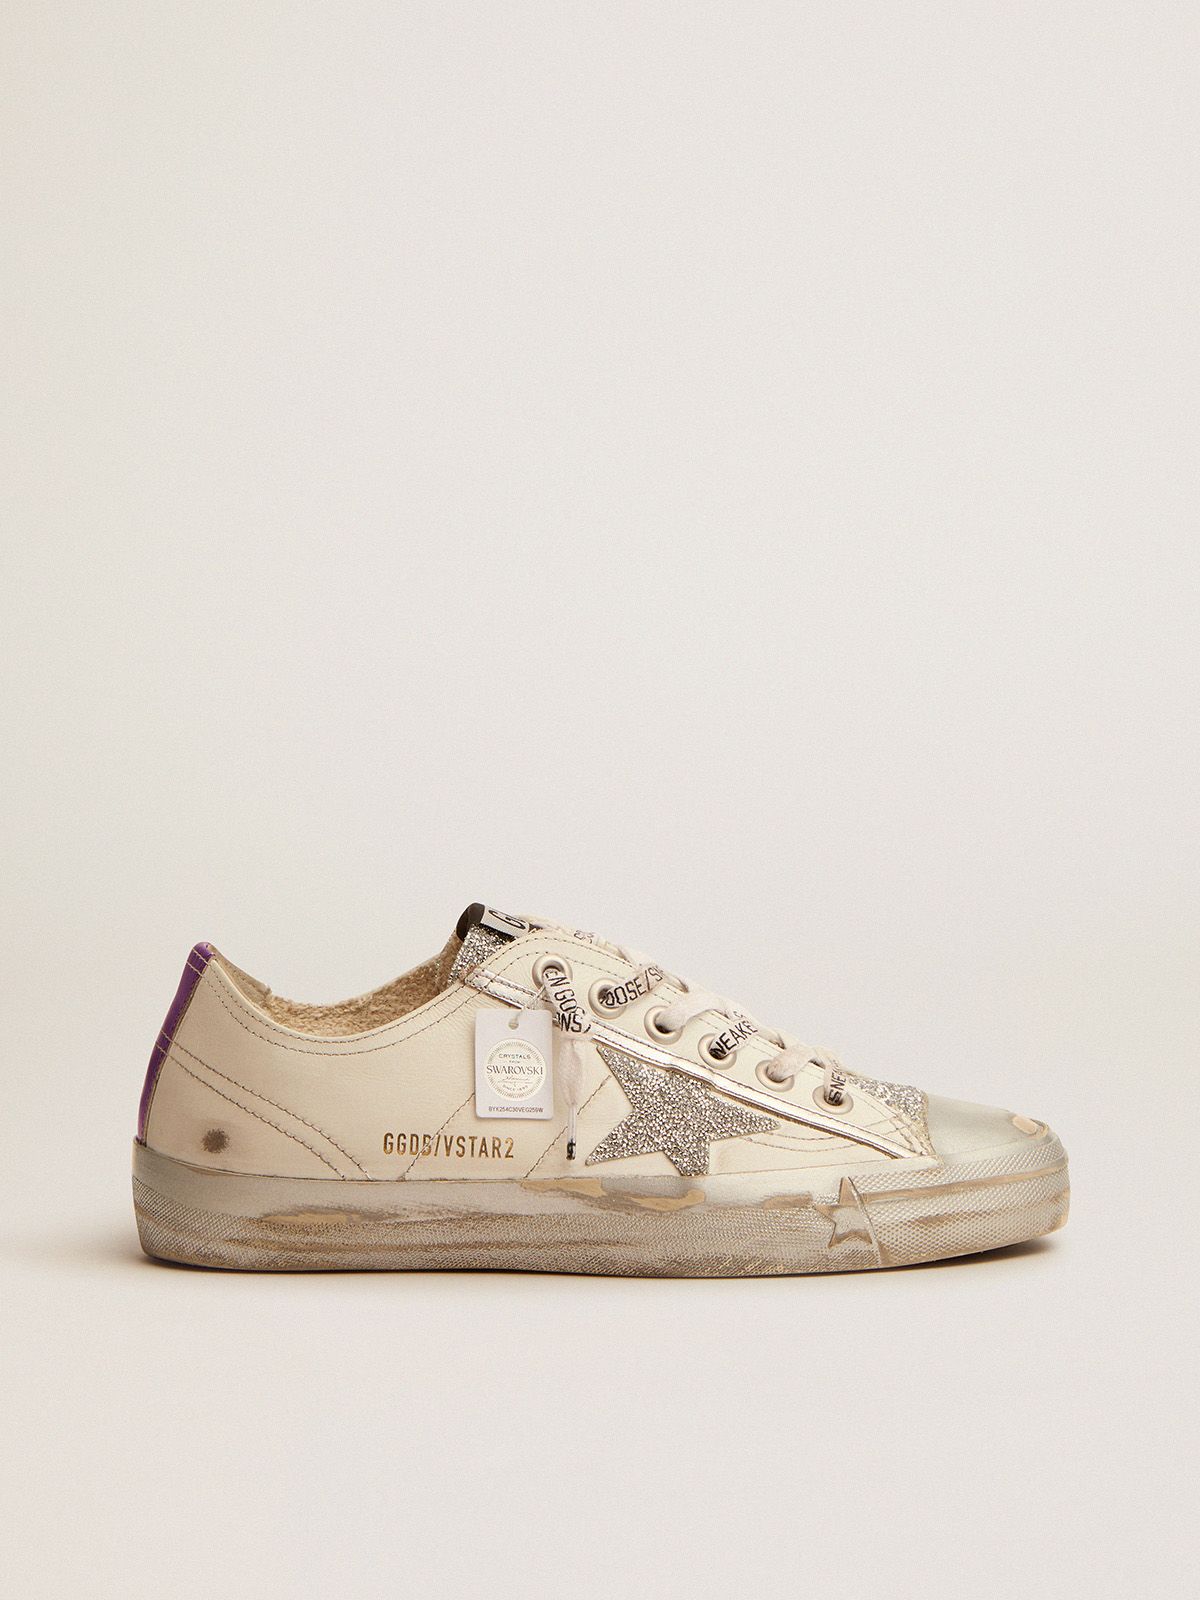 golden goose crystals LTD V-Star leather sneakers in white and